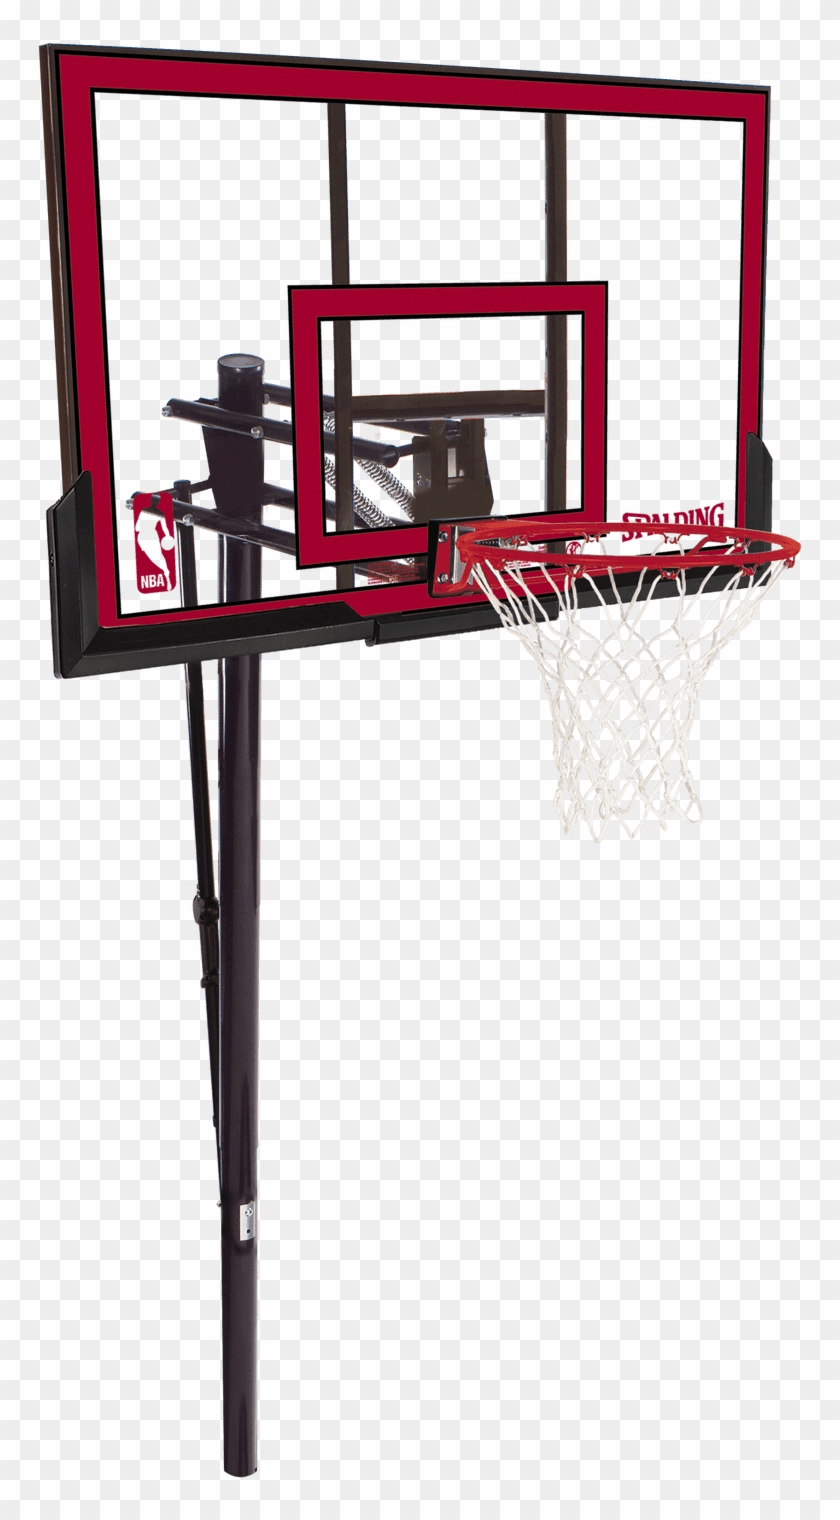 Spalding 48" Polycarbonate In-ground Basketball Hoop - Basketball Hoop Spalding Clipart #1785464